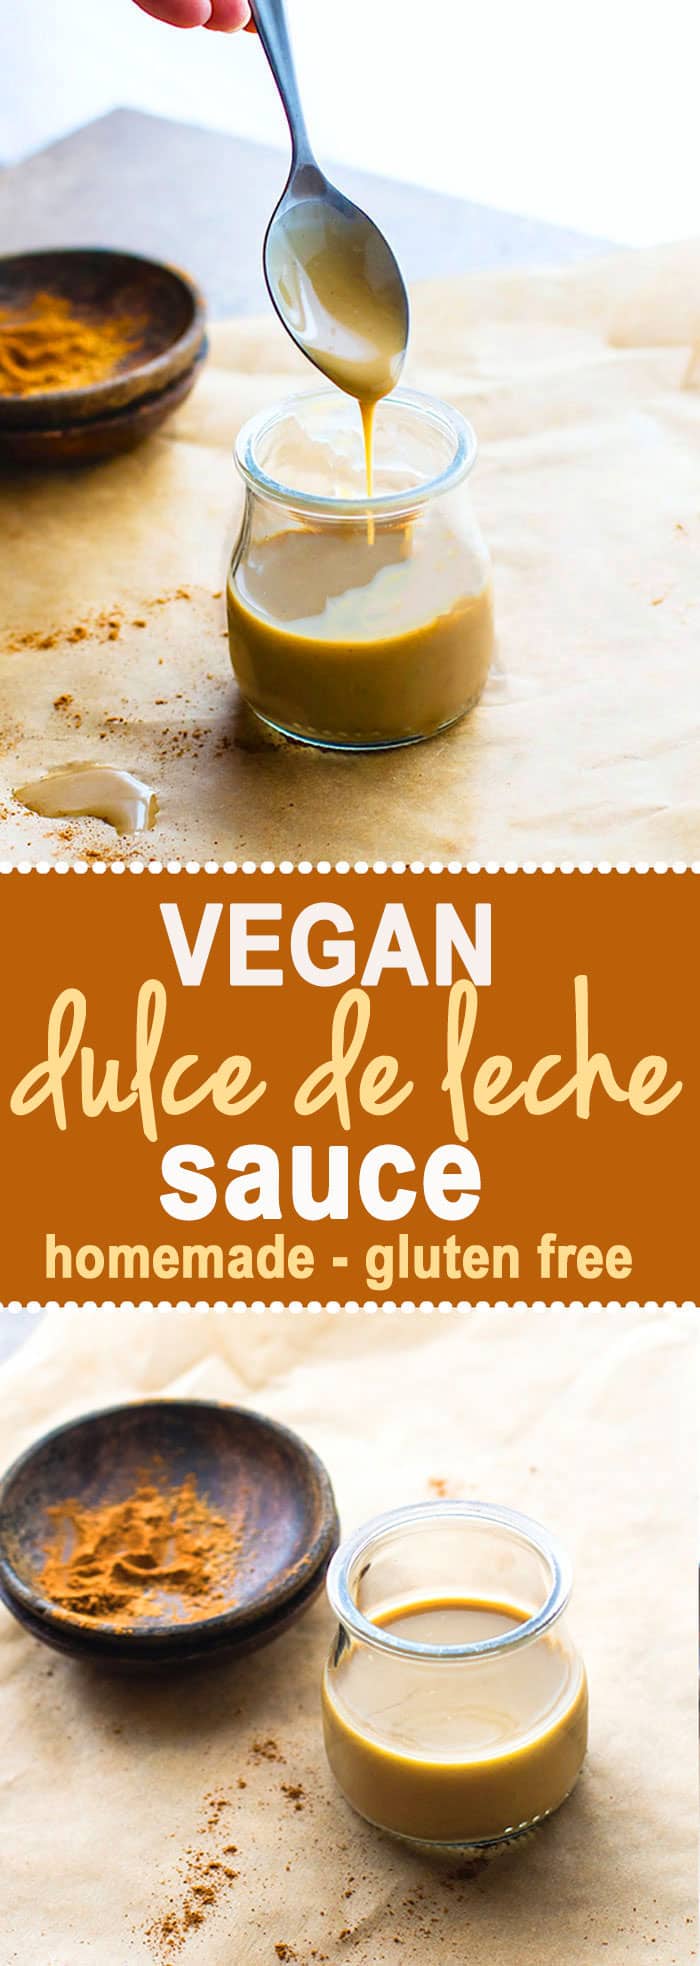 Homemade Vegan Dulce De Leche Sauce made with Natural Unrefined Sugar. A healthy gluten free vegan alternative to your classic dulce de leche sauce. Great on desserts (or mexican chocolate MUFFINS), in coffee, in smoothies, and more! Easy to make and made with simple ingredients